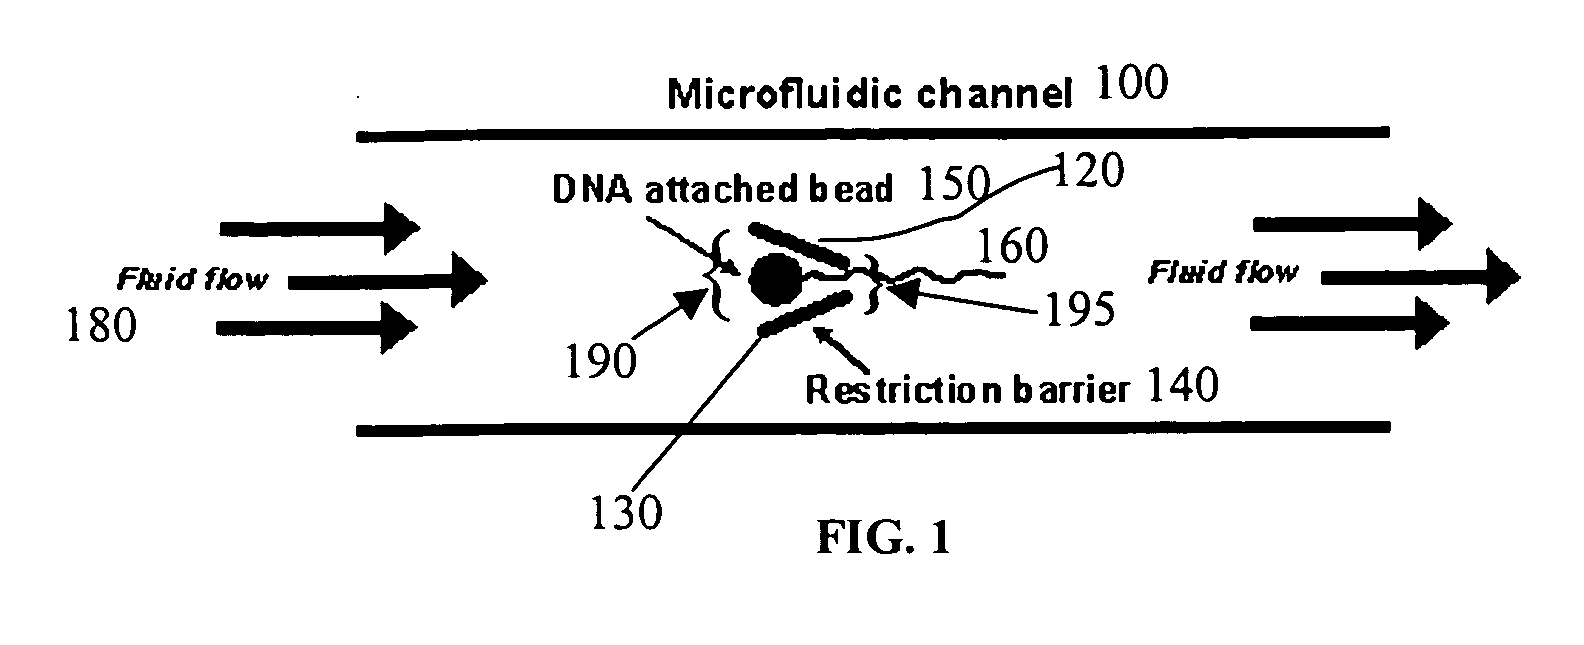 Microfluidic apparatus, systems, and methods for performing molecular reactions